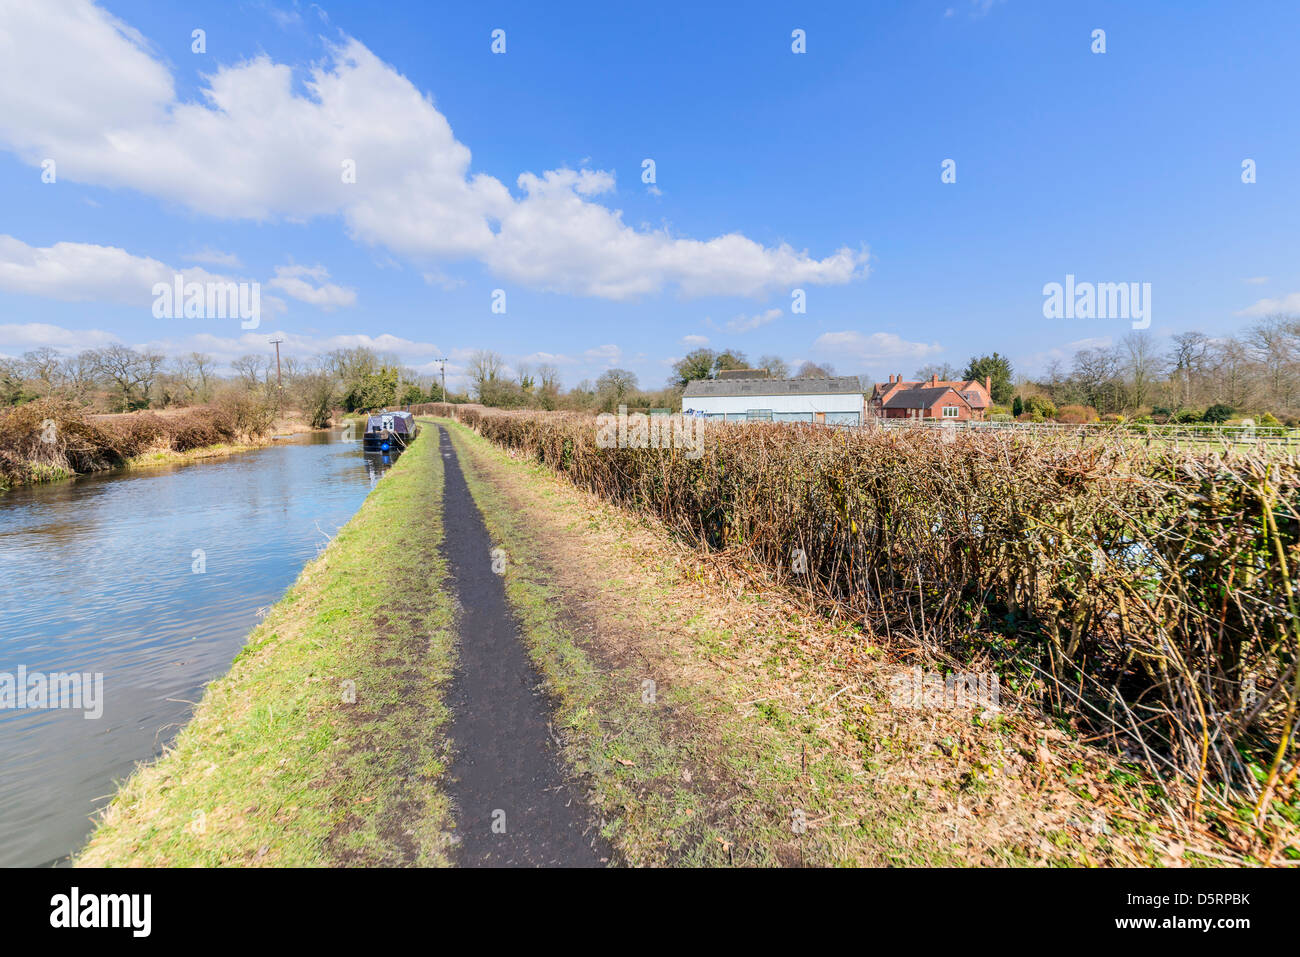 canal england uk inland waterway waterways waterway water river navigable navigation scenic scenery landscape boating holiday Stock Photo